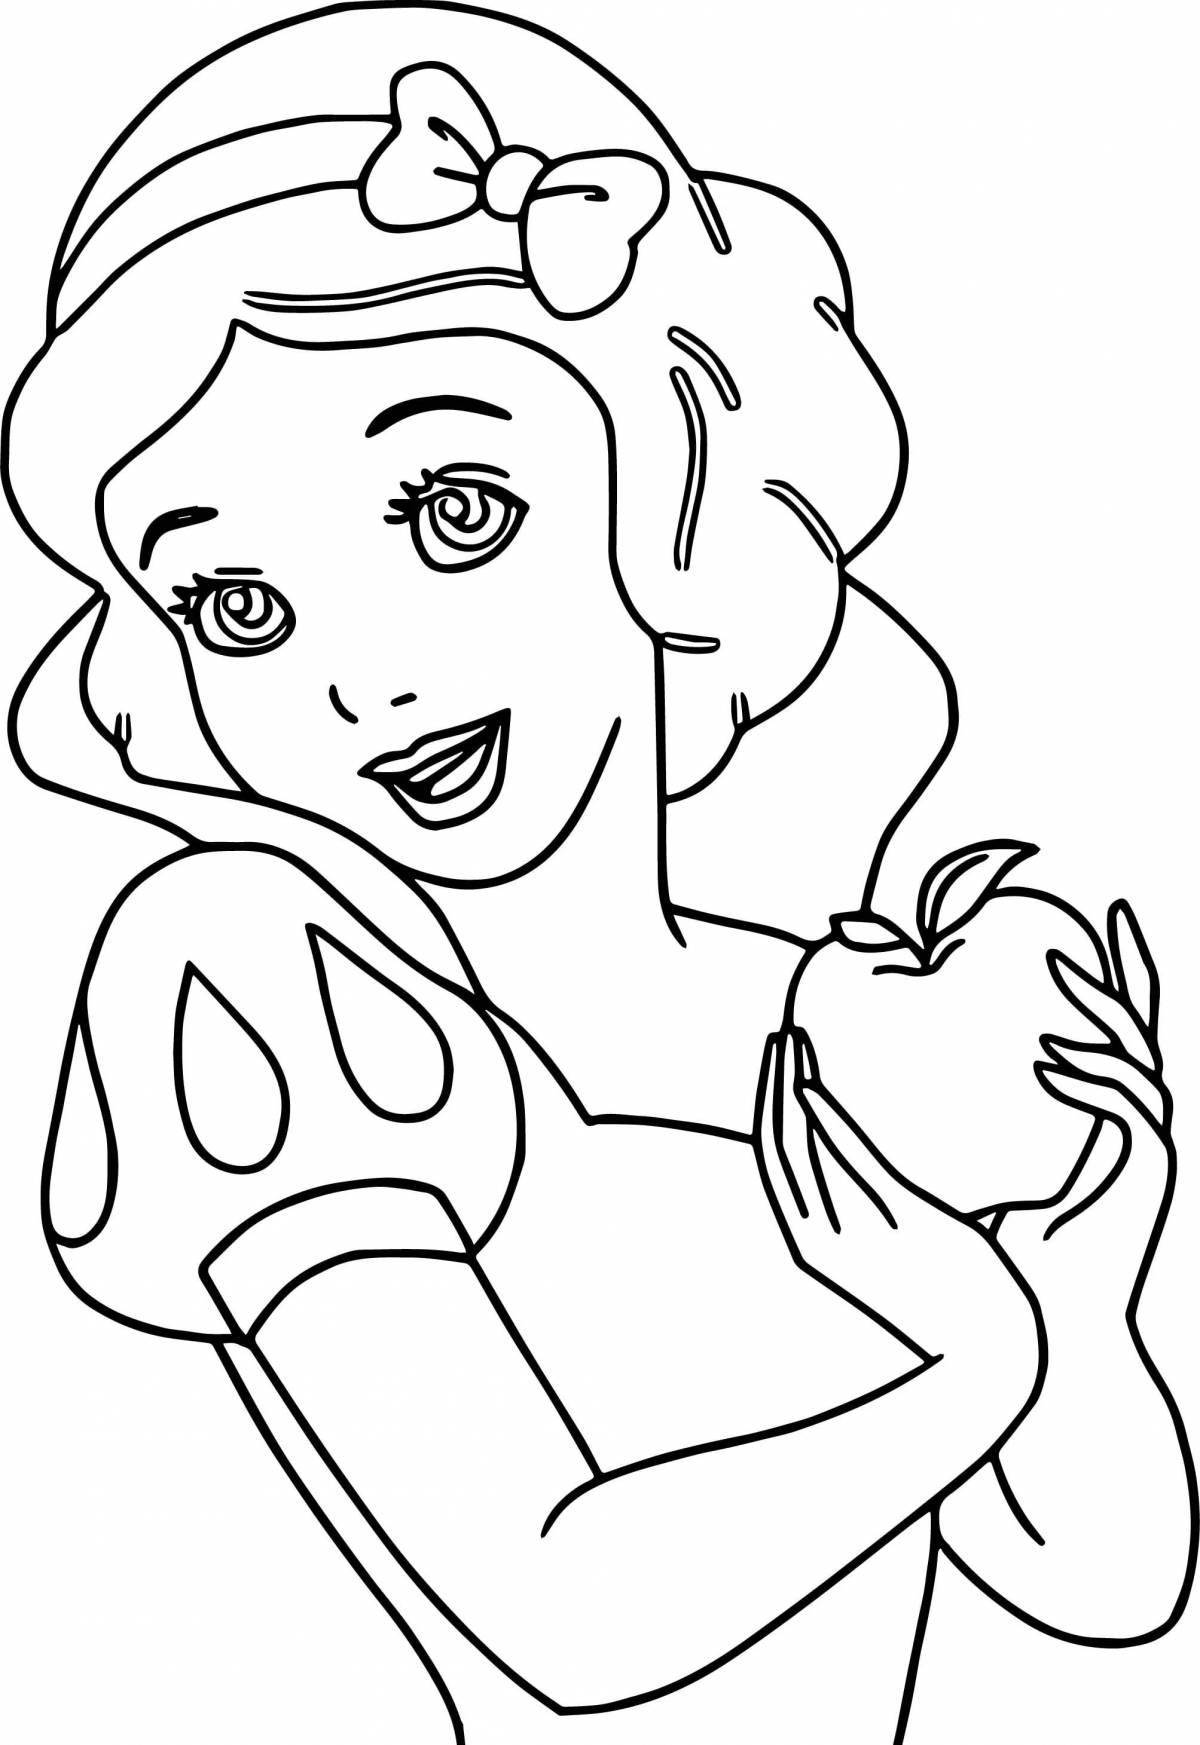 Dazzling coloring page 7 for girls